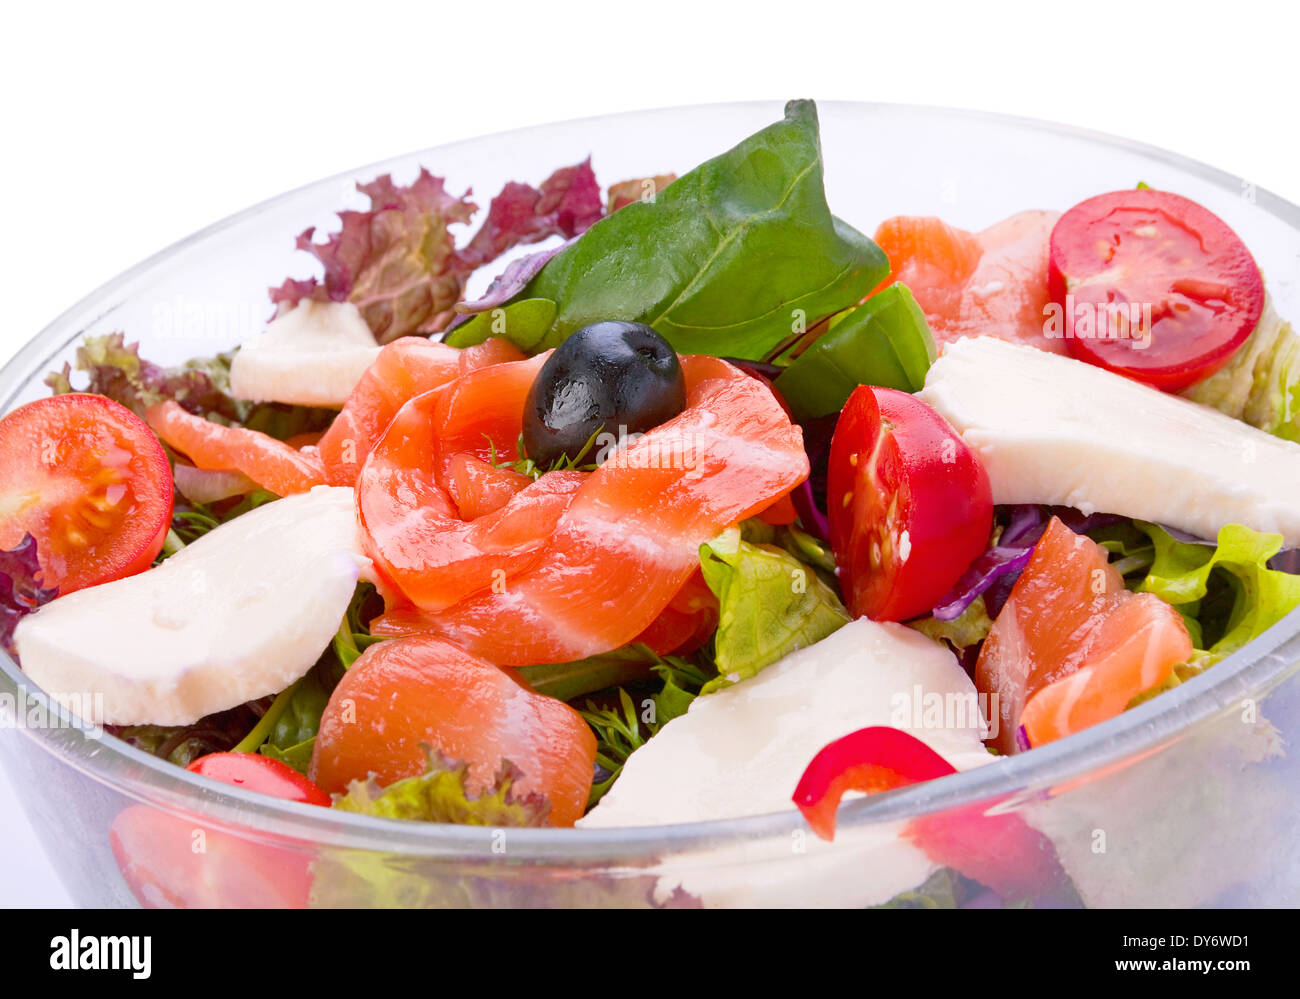 Salad with red fish salmon vegetable and cheese Stock Photo